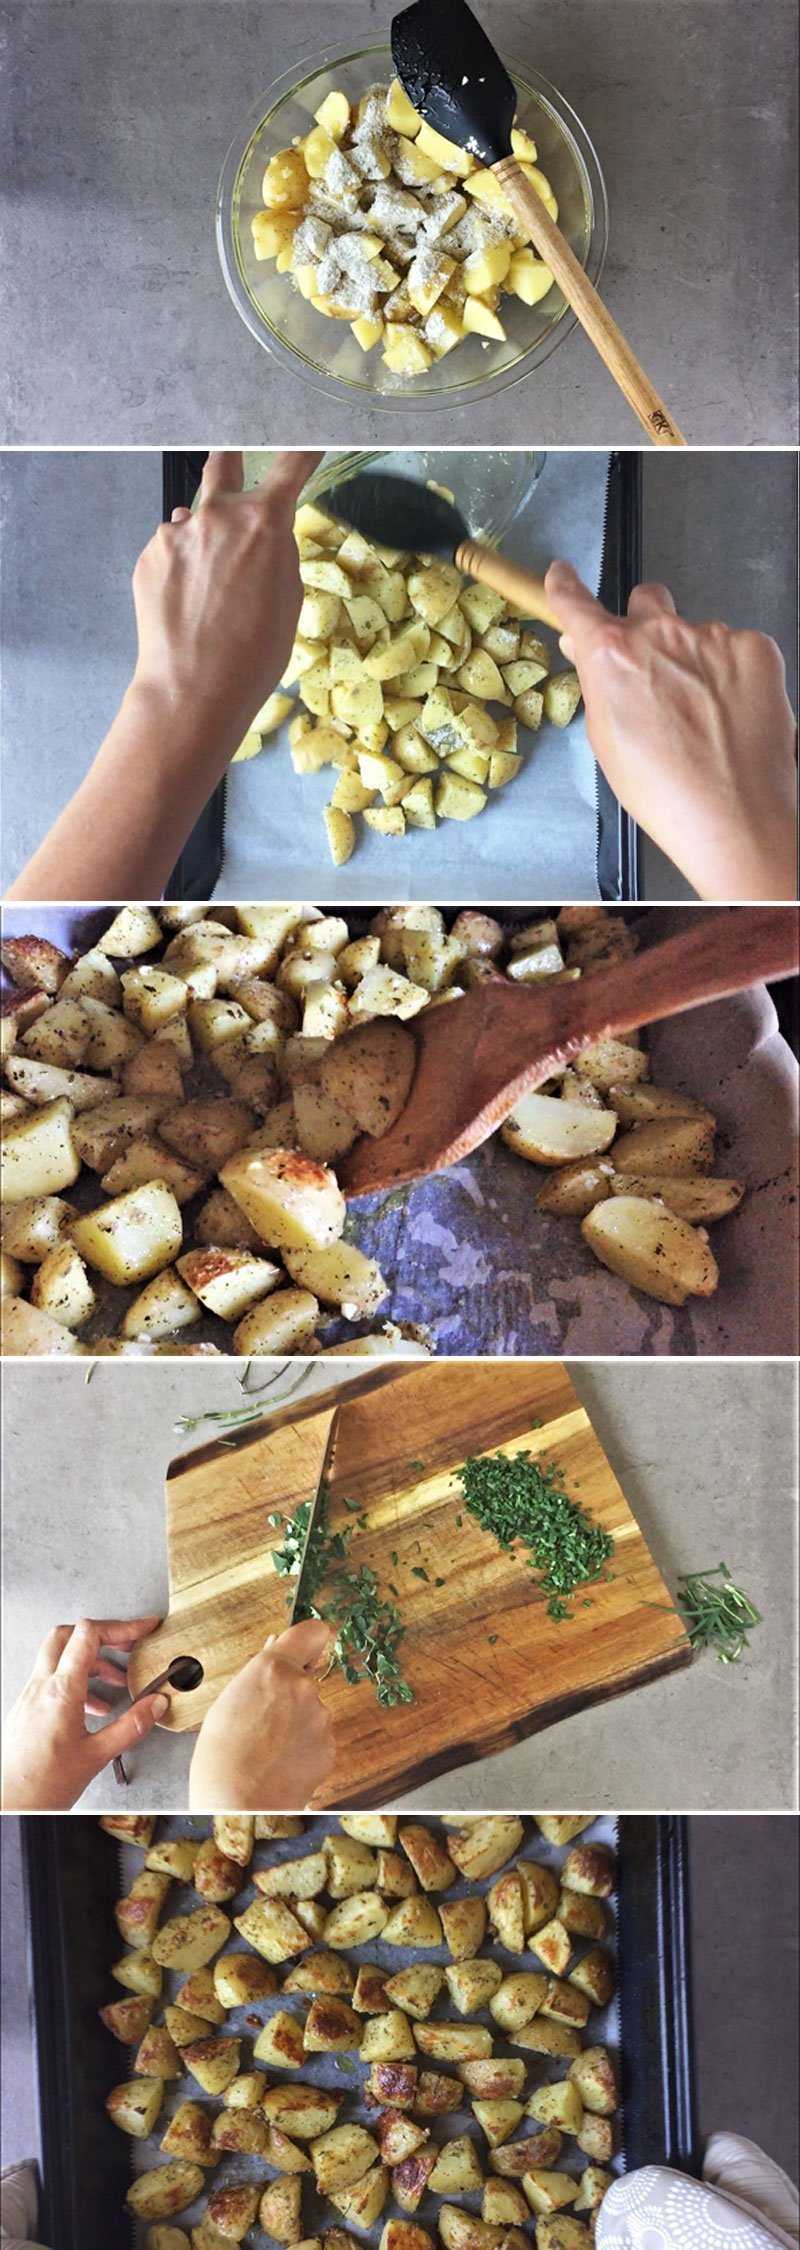 Image sequence - How to roast crispy potatoes with garlic and herbs - part 2